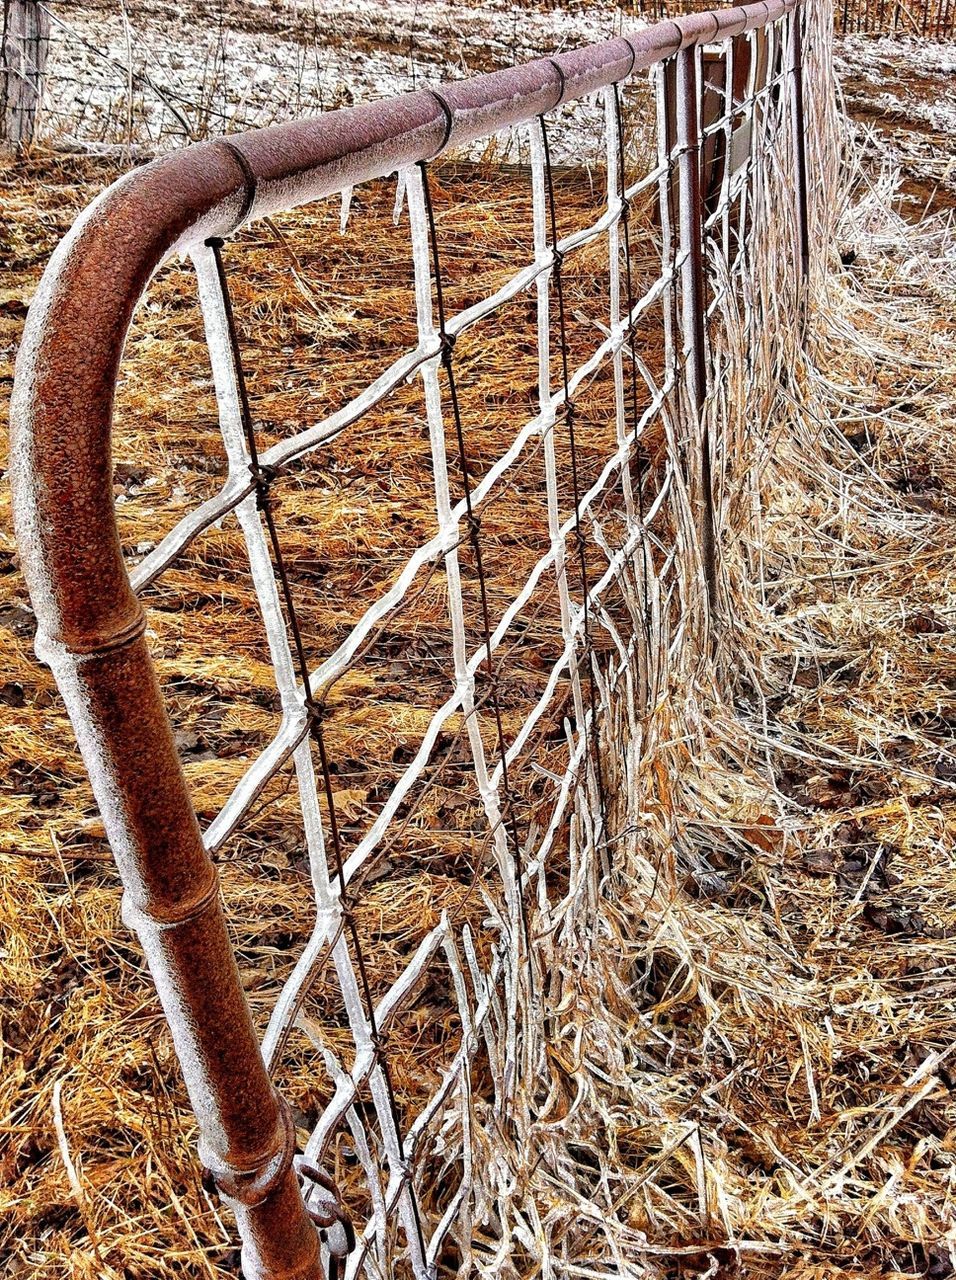 metal, fence, field, rusty, metallic, protection, safety, day, abandoned, wood - material, no people, outdoors, old, grass, railing, rural scene, sunlight, security, high angle view, built structure